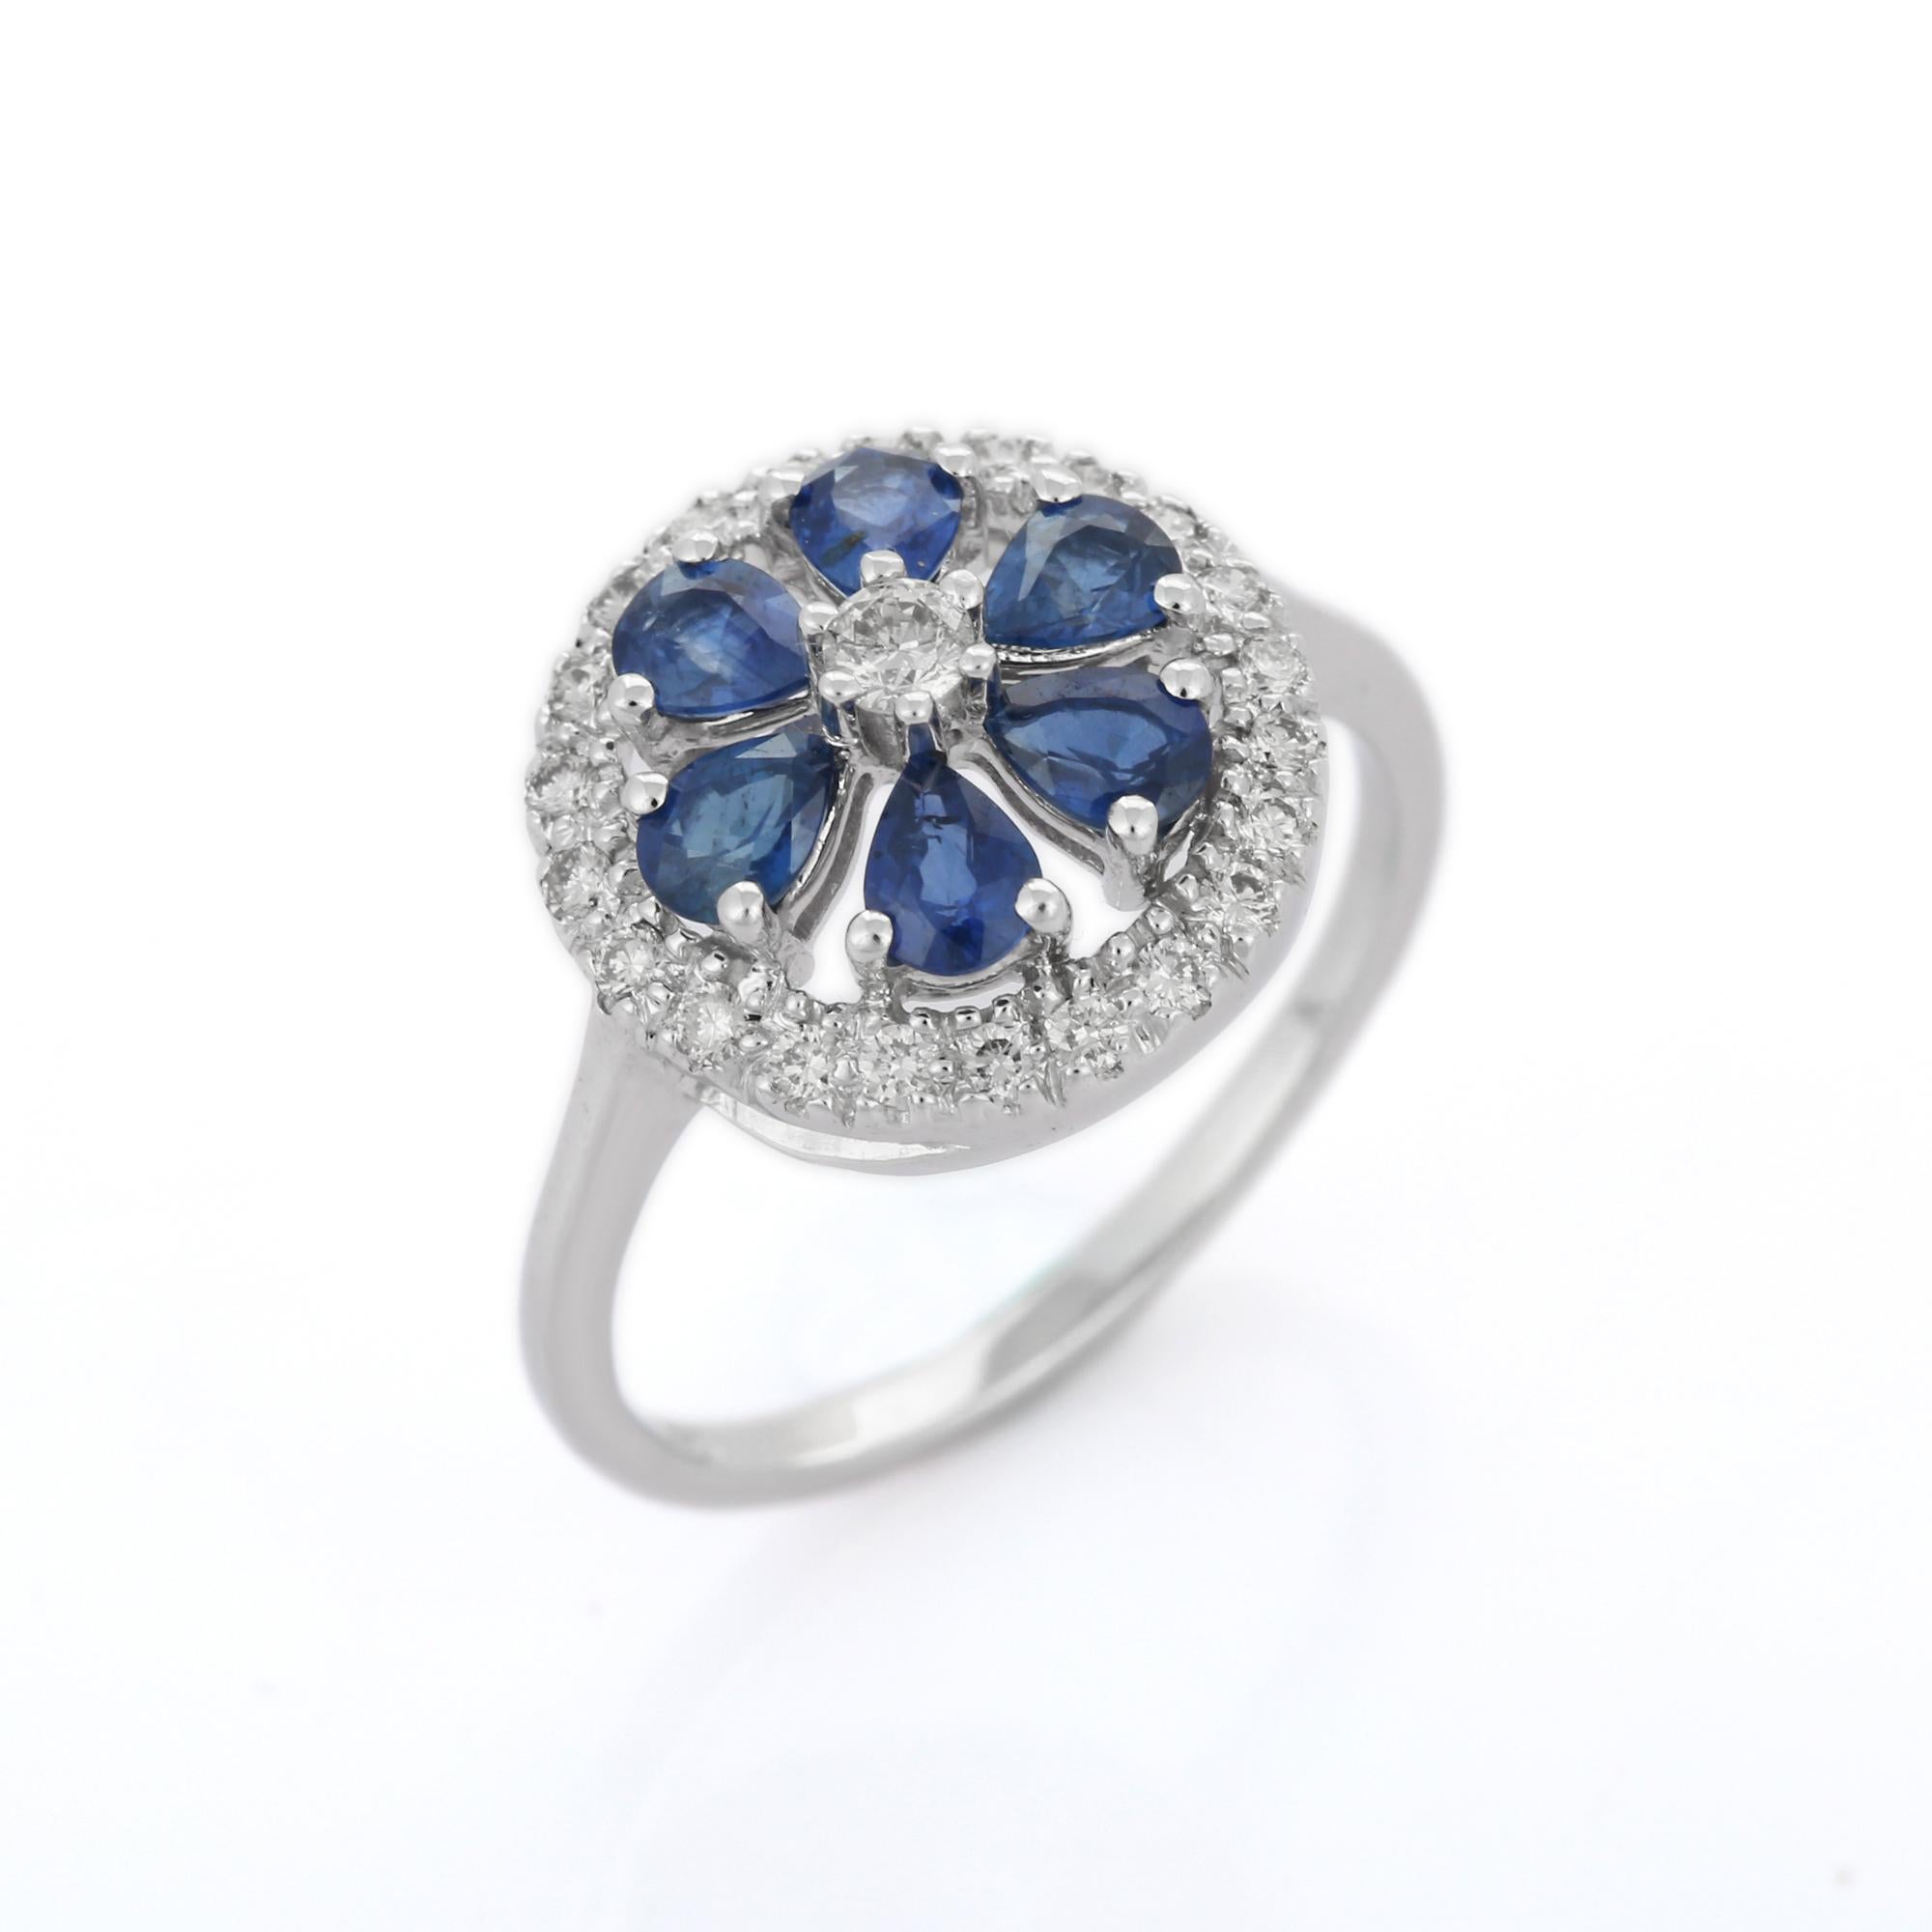 For Sale:  Estate 14k Solid White Gold Diamond and Blue Sapphire Flower Cocktail Ring 5